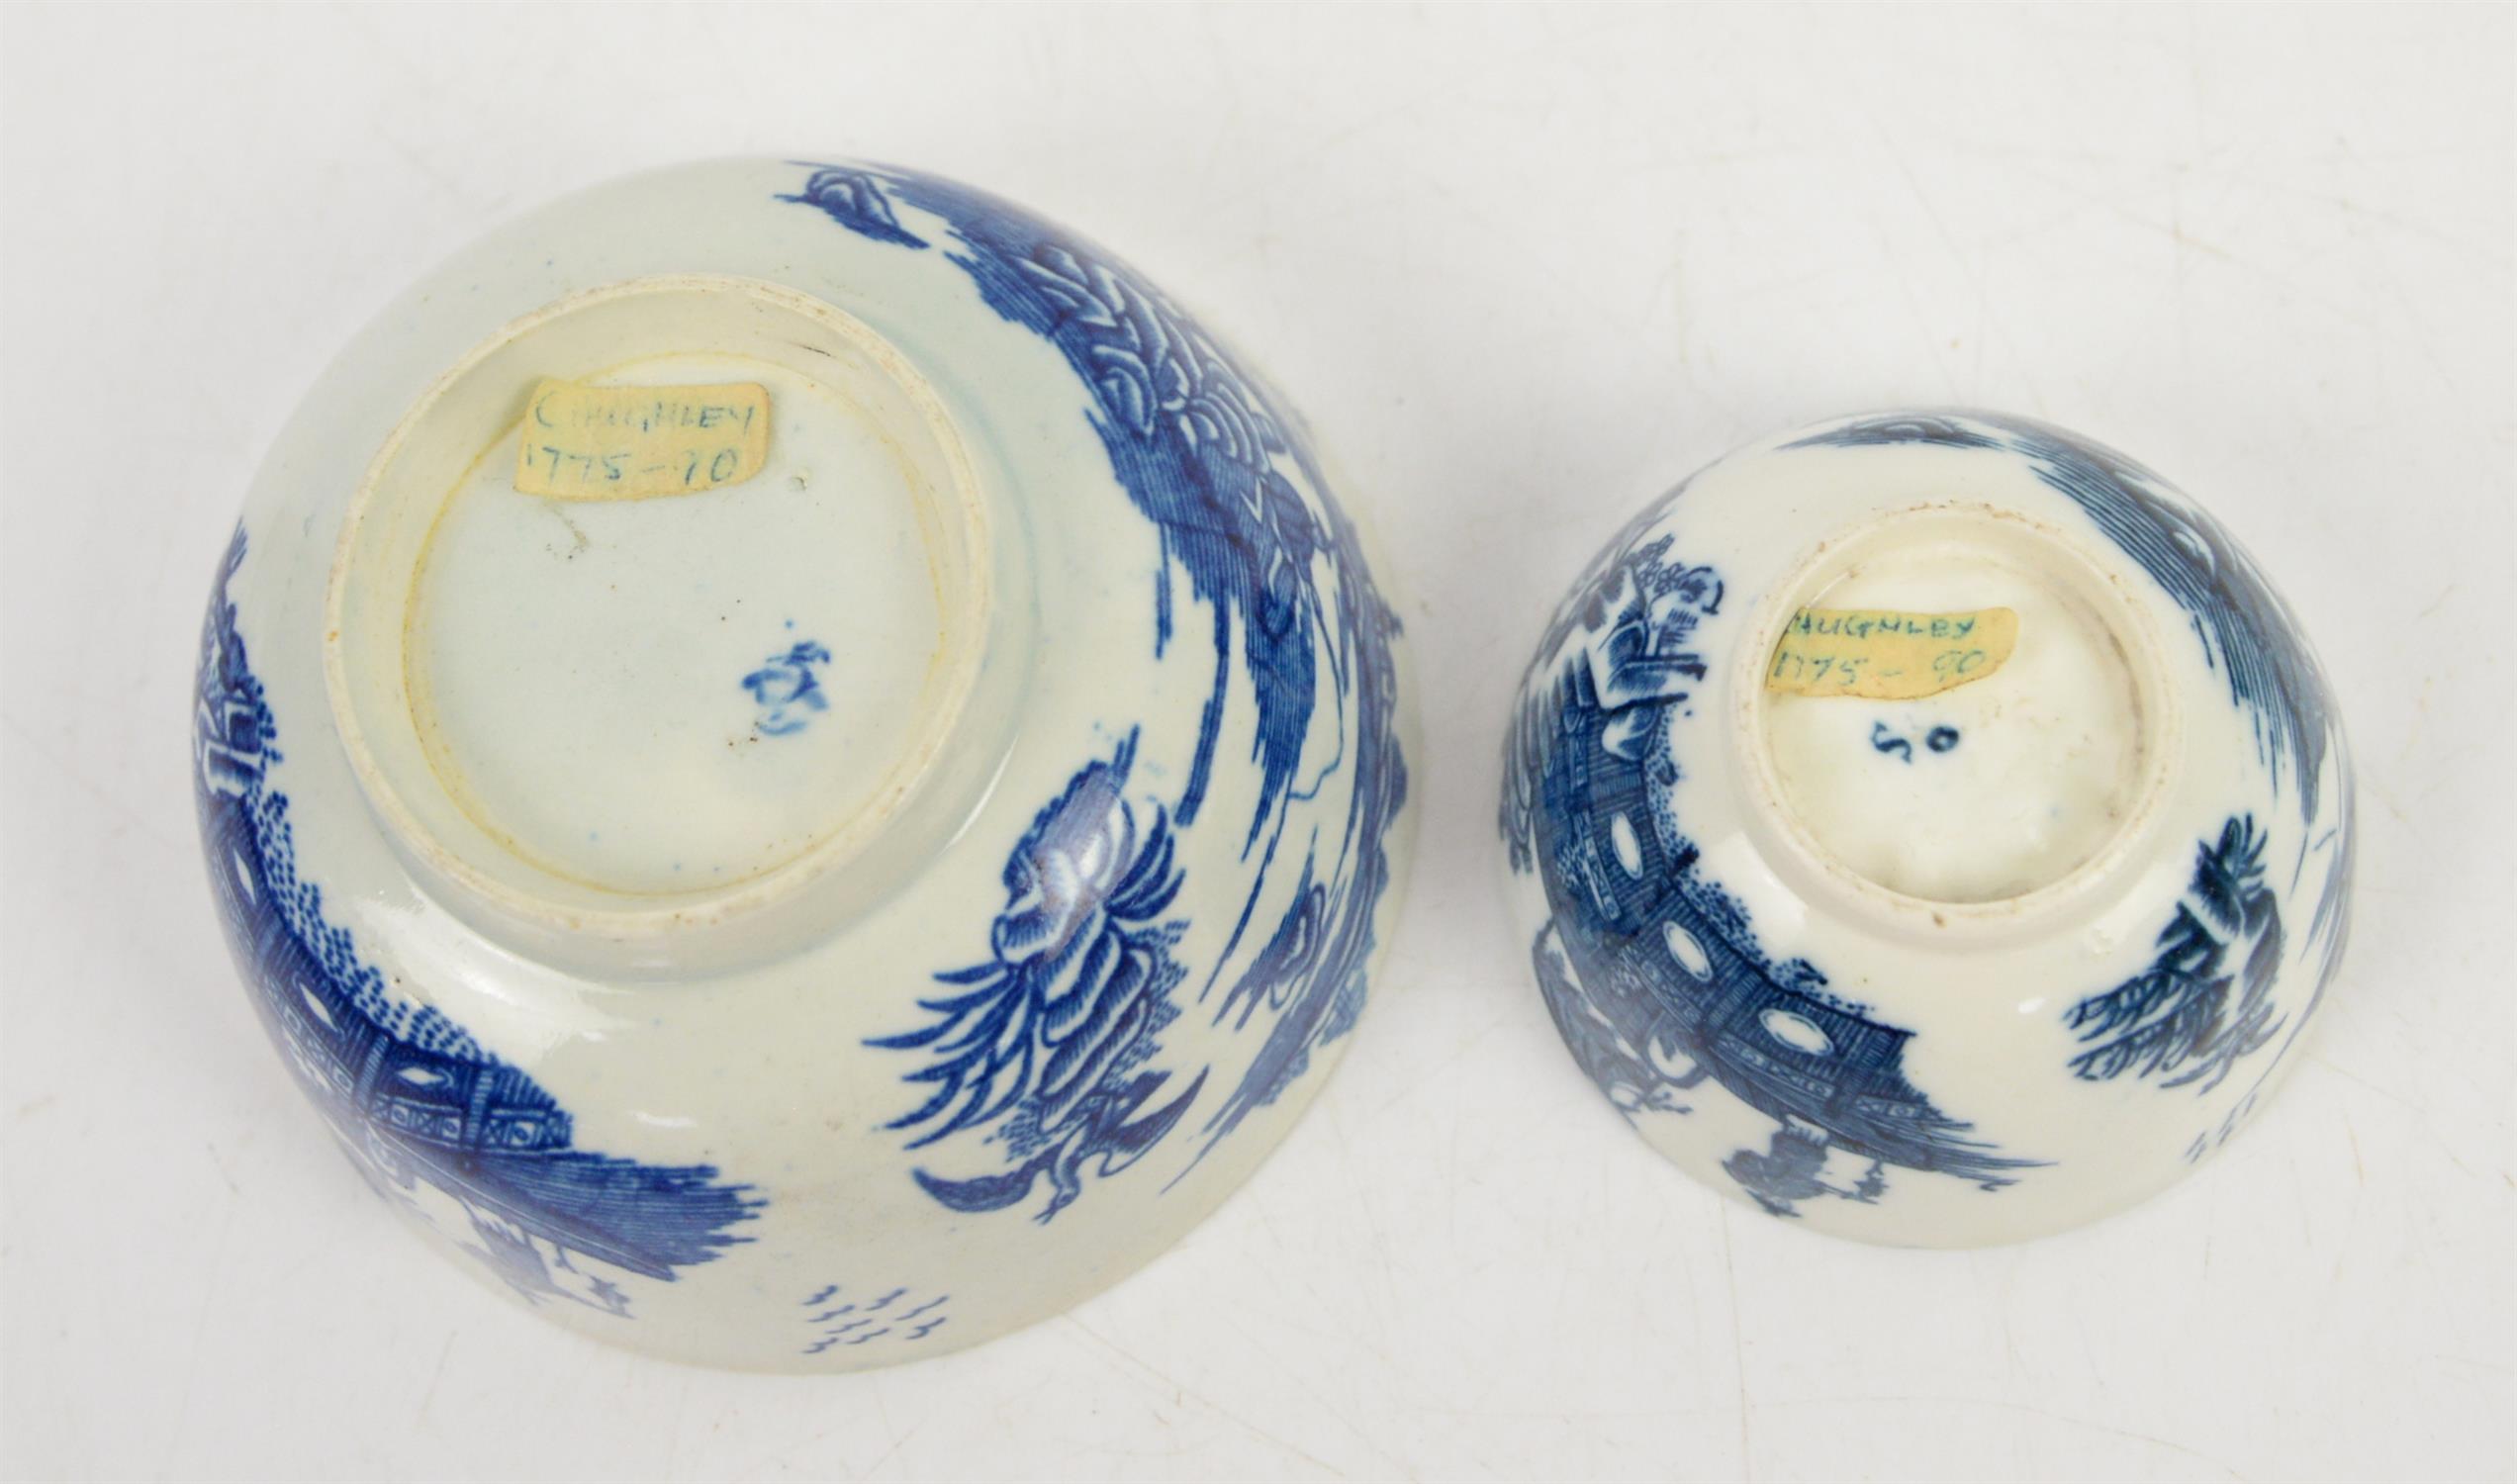 18th century Caughley cormorant pattern blue and white teabowl, h4.5cm, and a similar bowl, h6.5cm - Image 3 of 3